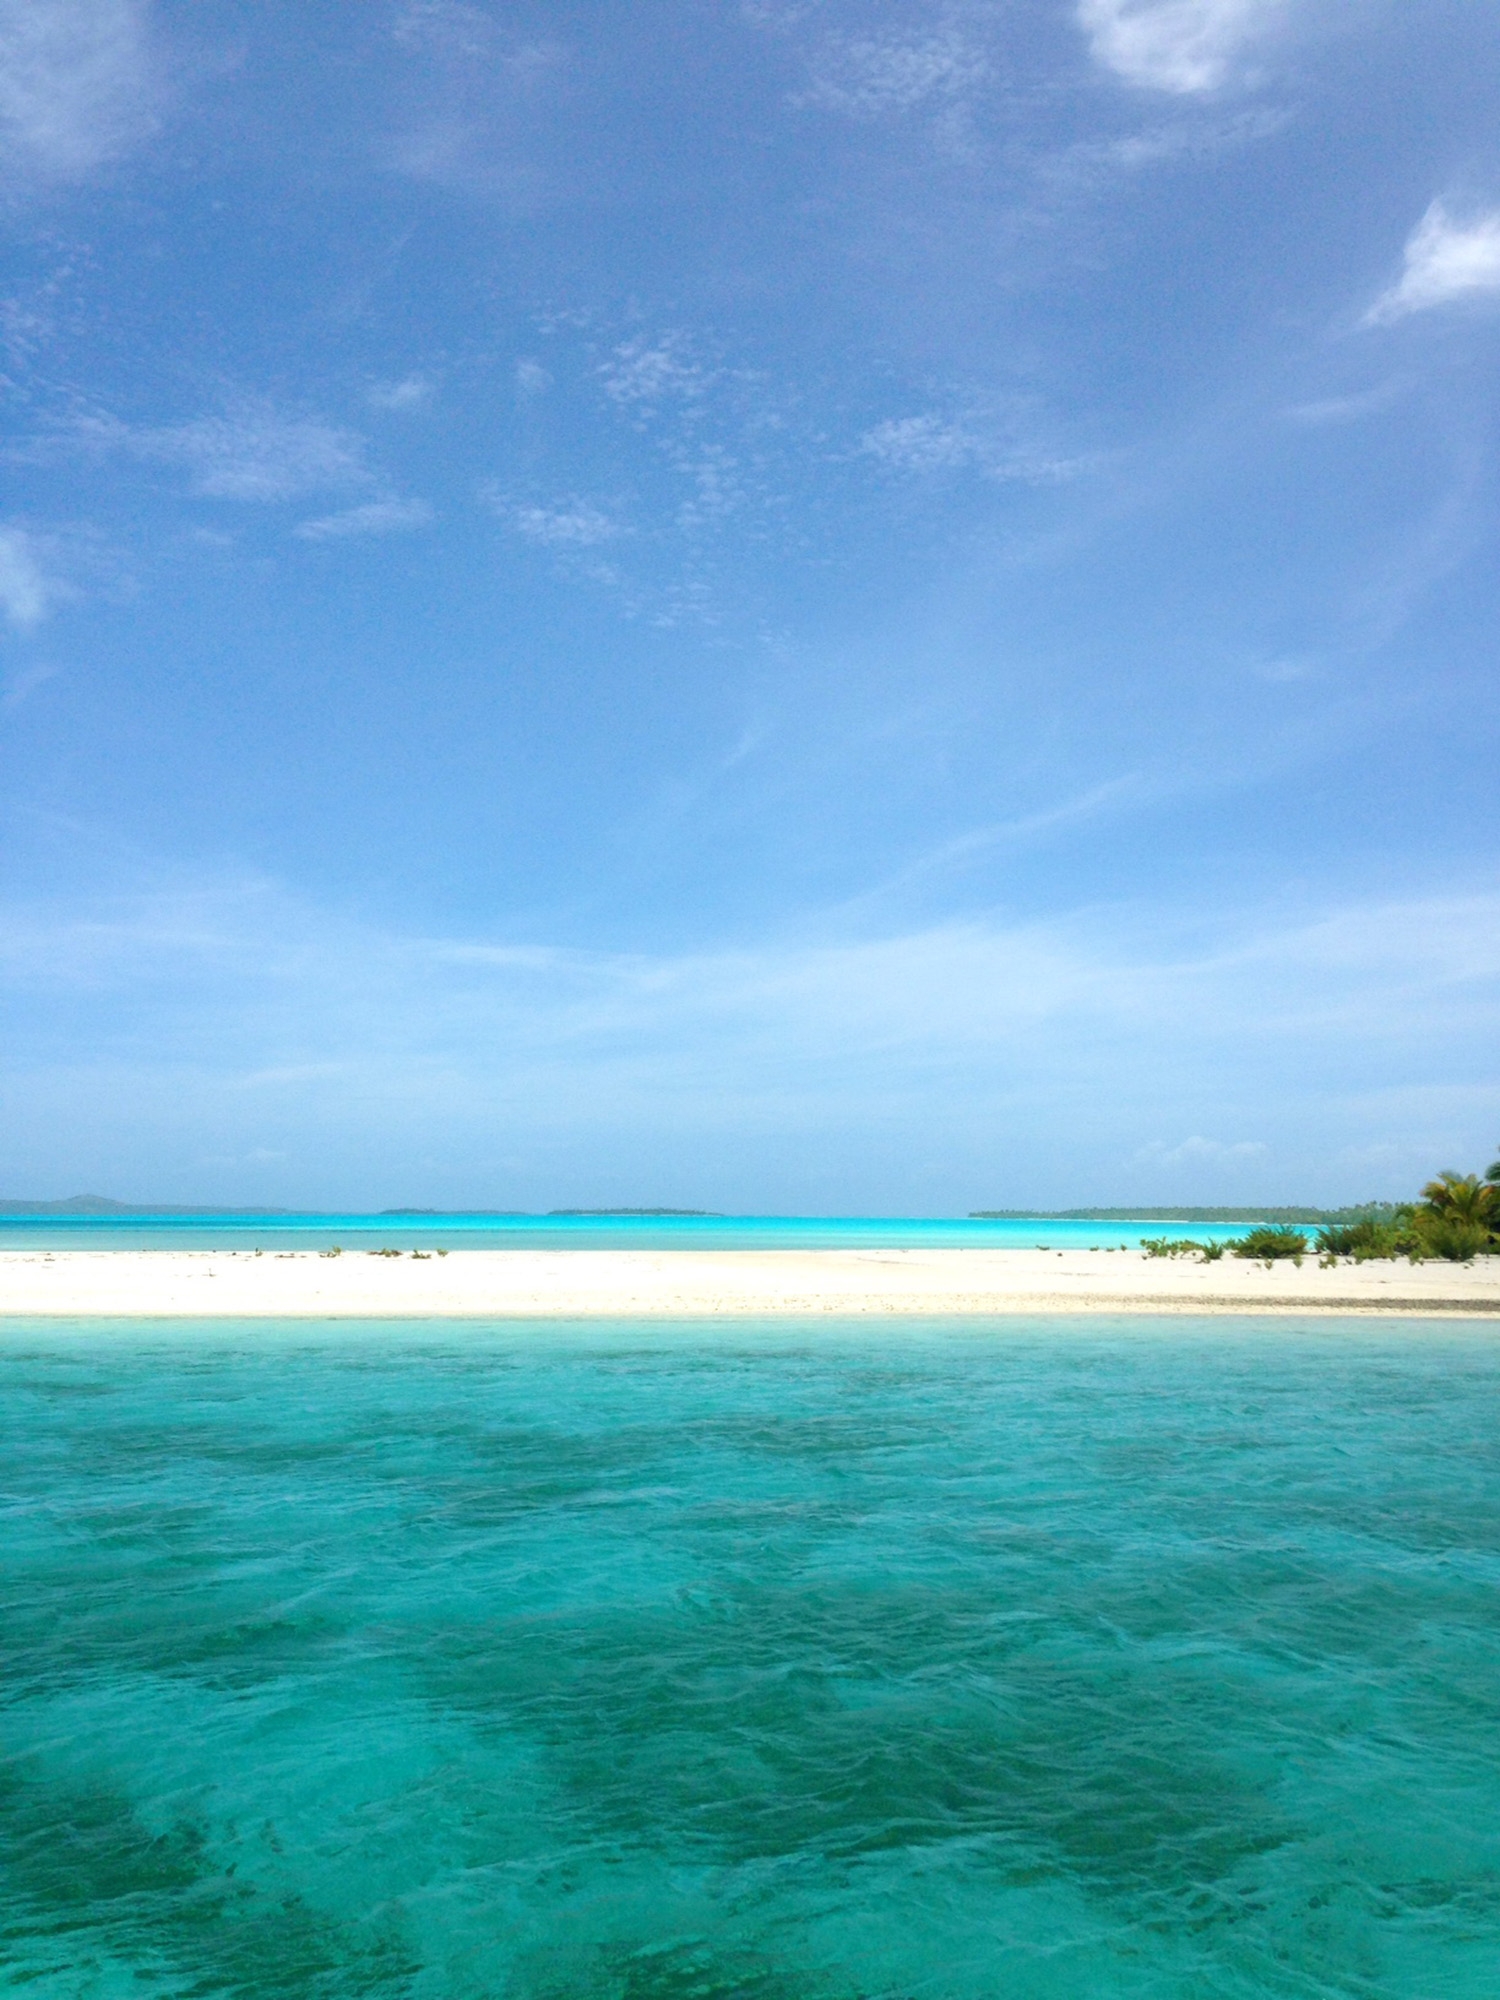 The crystal blue water and white sandy beaches of the Cook Island landscape 